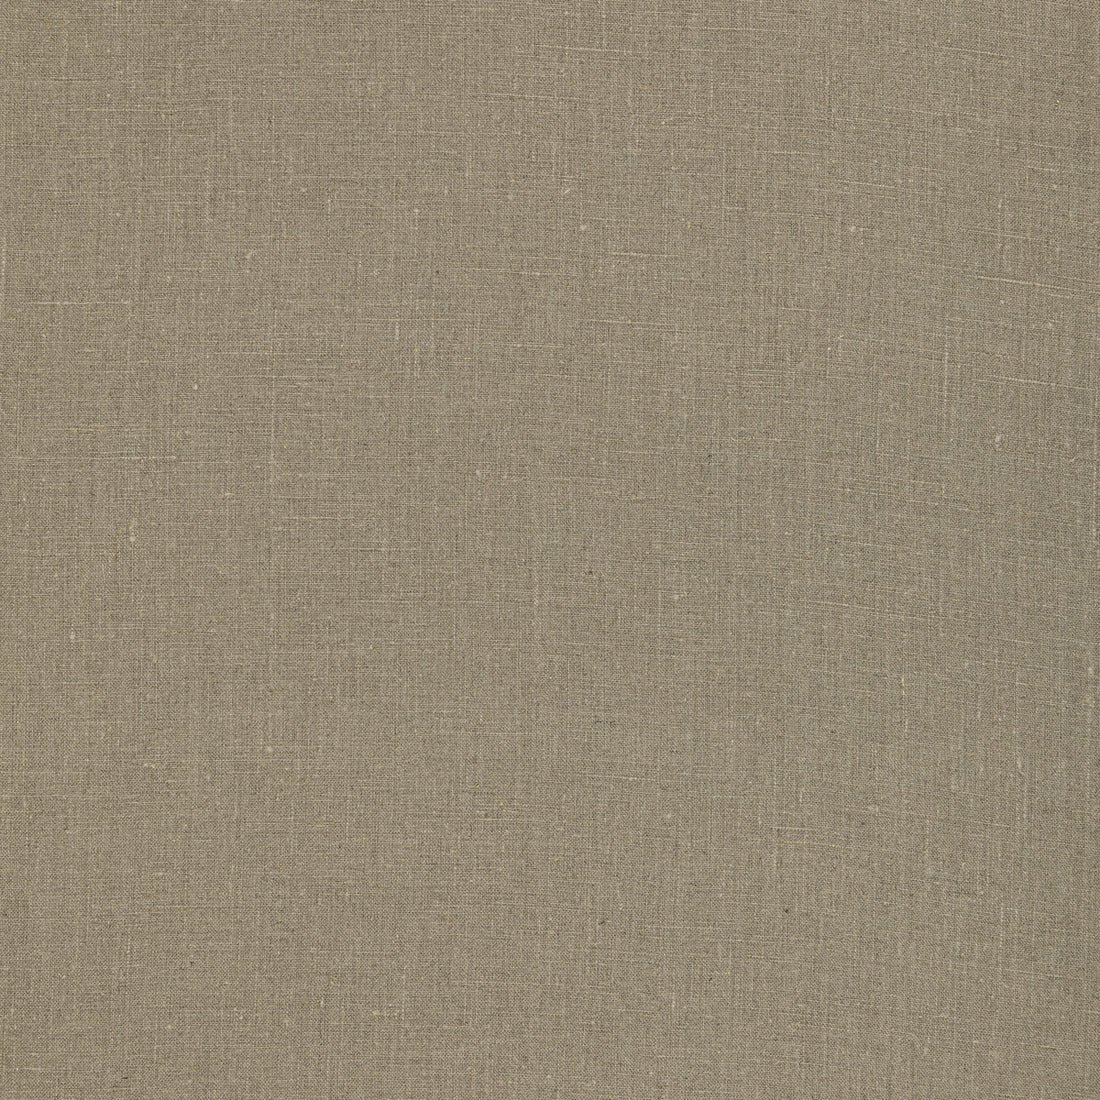 Skarn fabric in linen color - pattern ED85384.110.0 - by Threads in the Quintessential Naturals collection